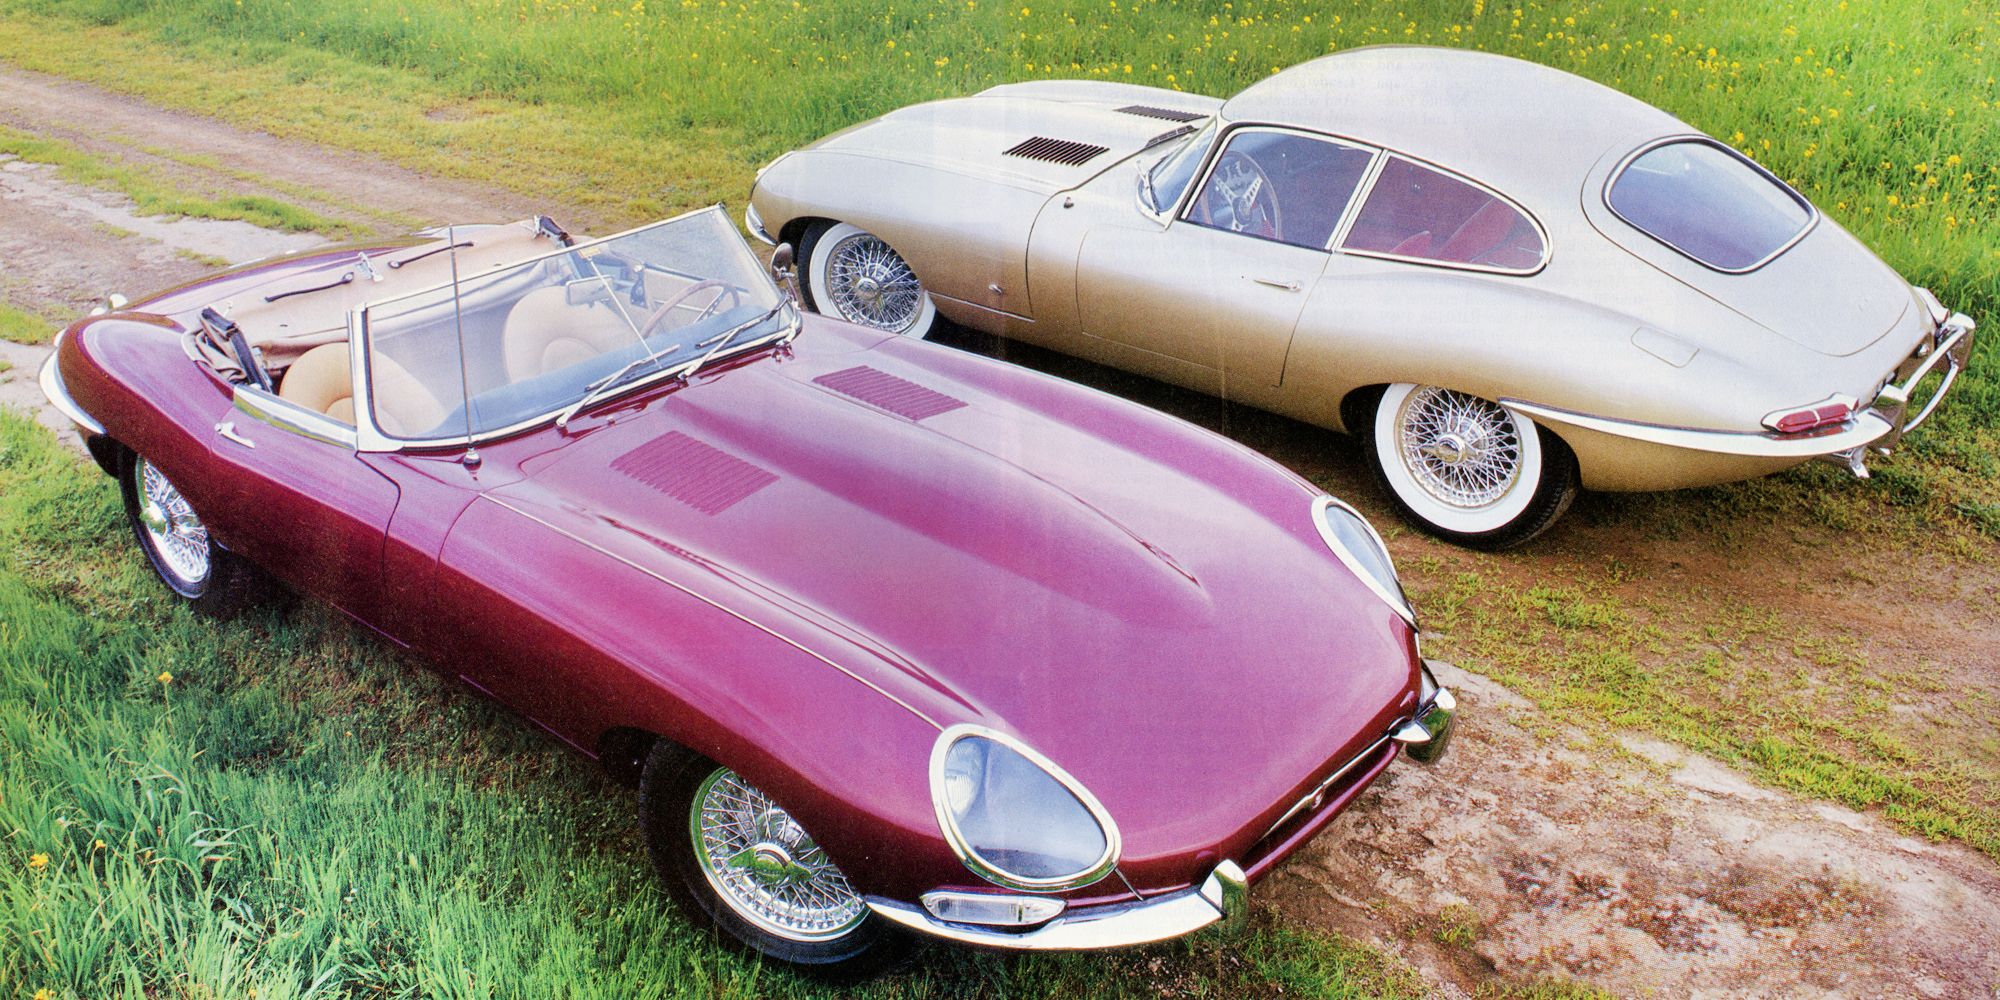 Jaguar E-Type Review: ONE of the GREATEST Classic Cars Of All Time